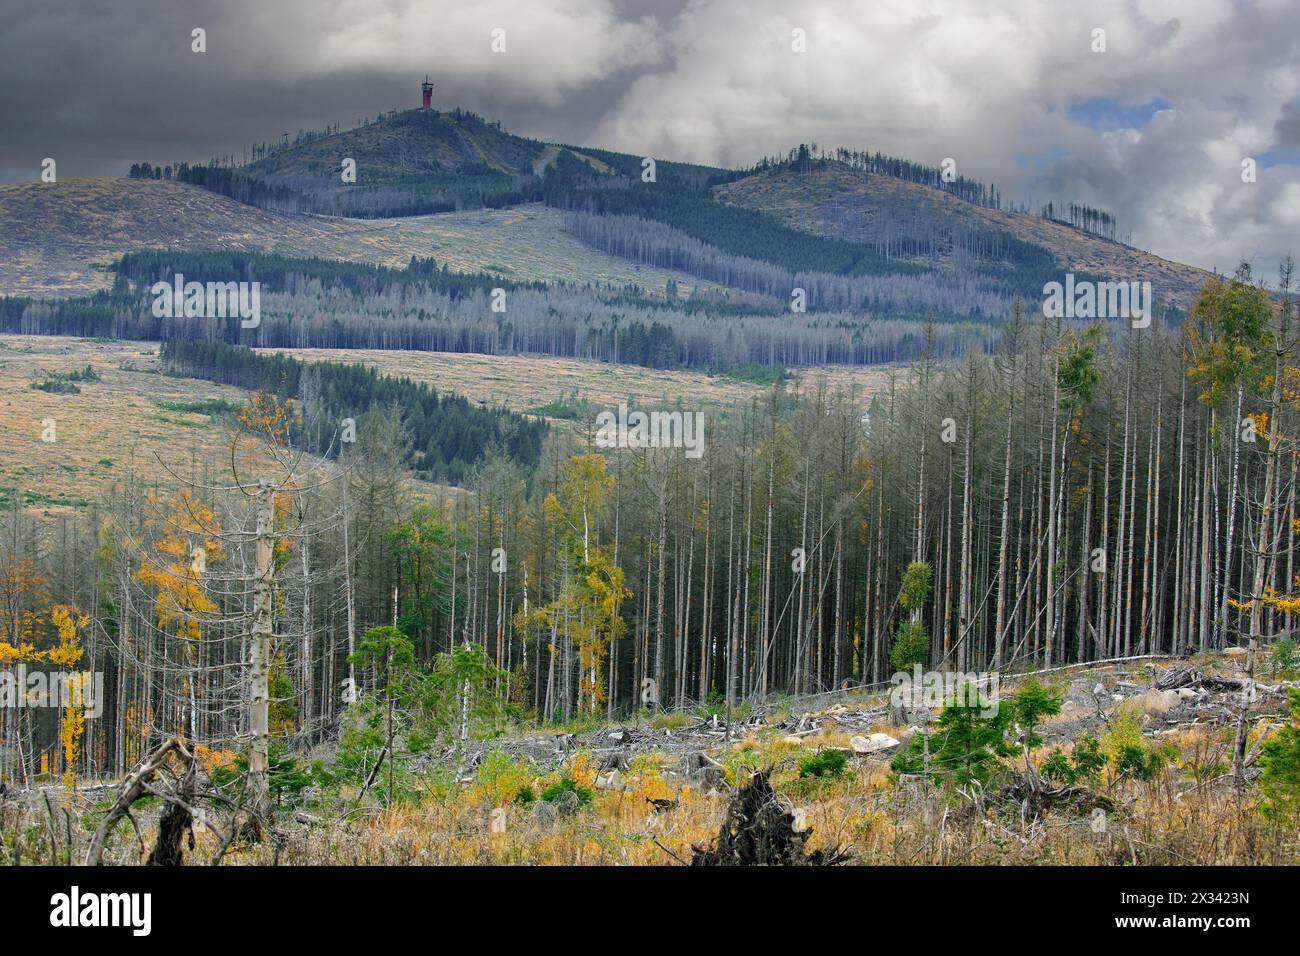 Dead spruce trees, destruction in forest caused by European spruce bark beetle (Ips typographus) infestation in Harz Mountains, Saxony-Anhalt, Germany Stock Photo